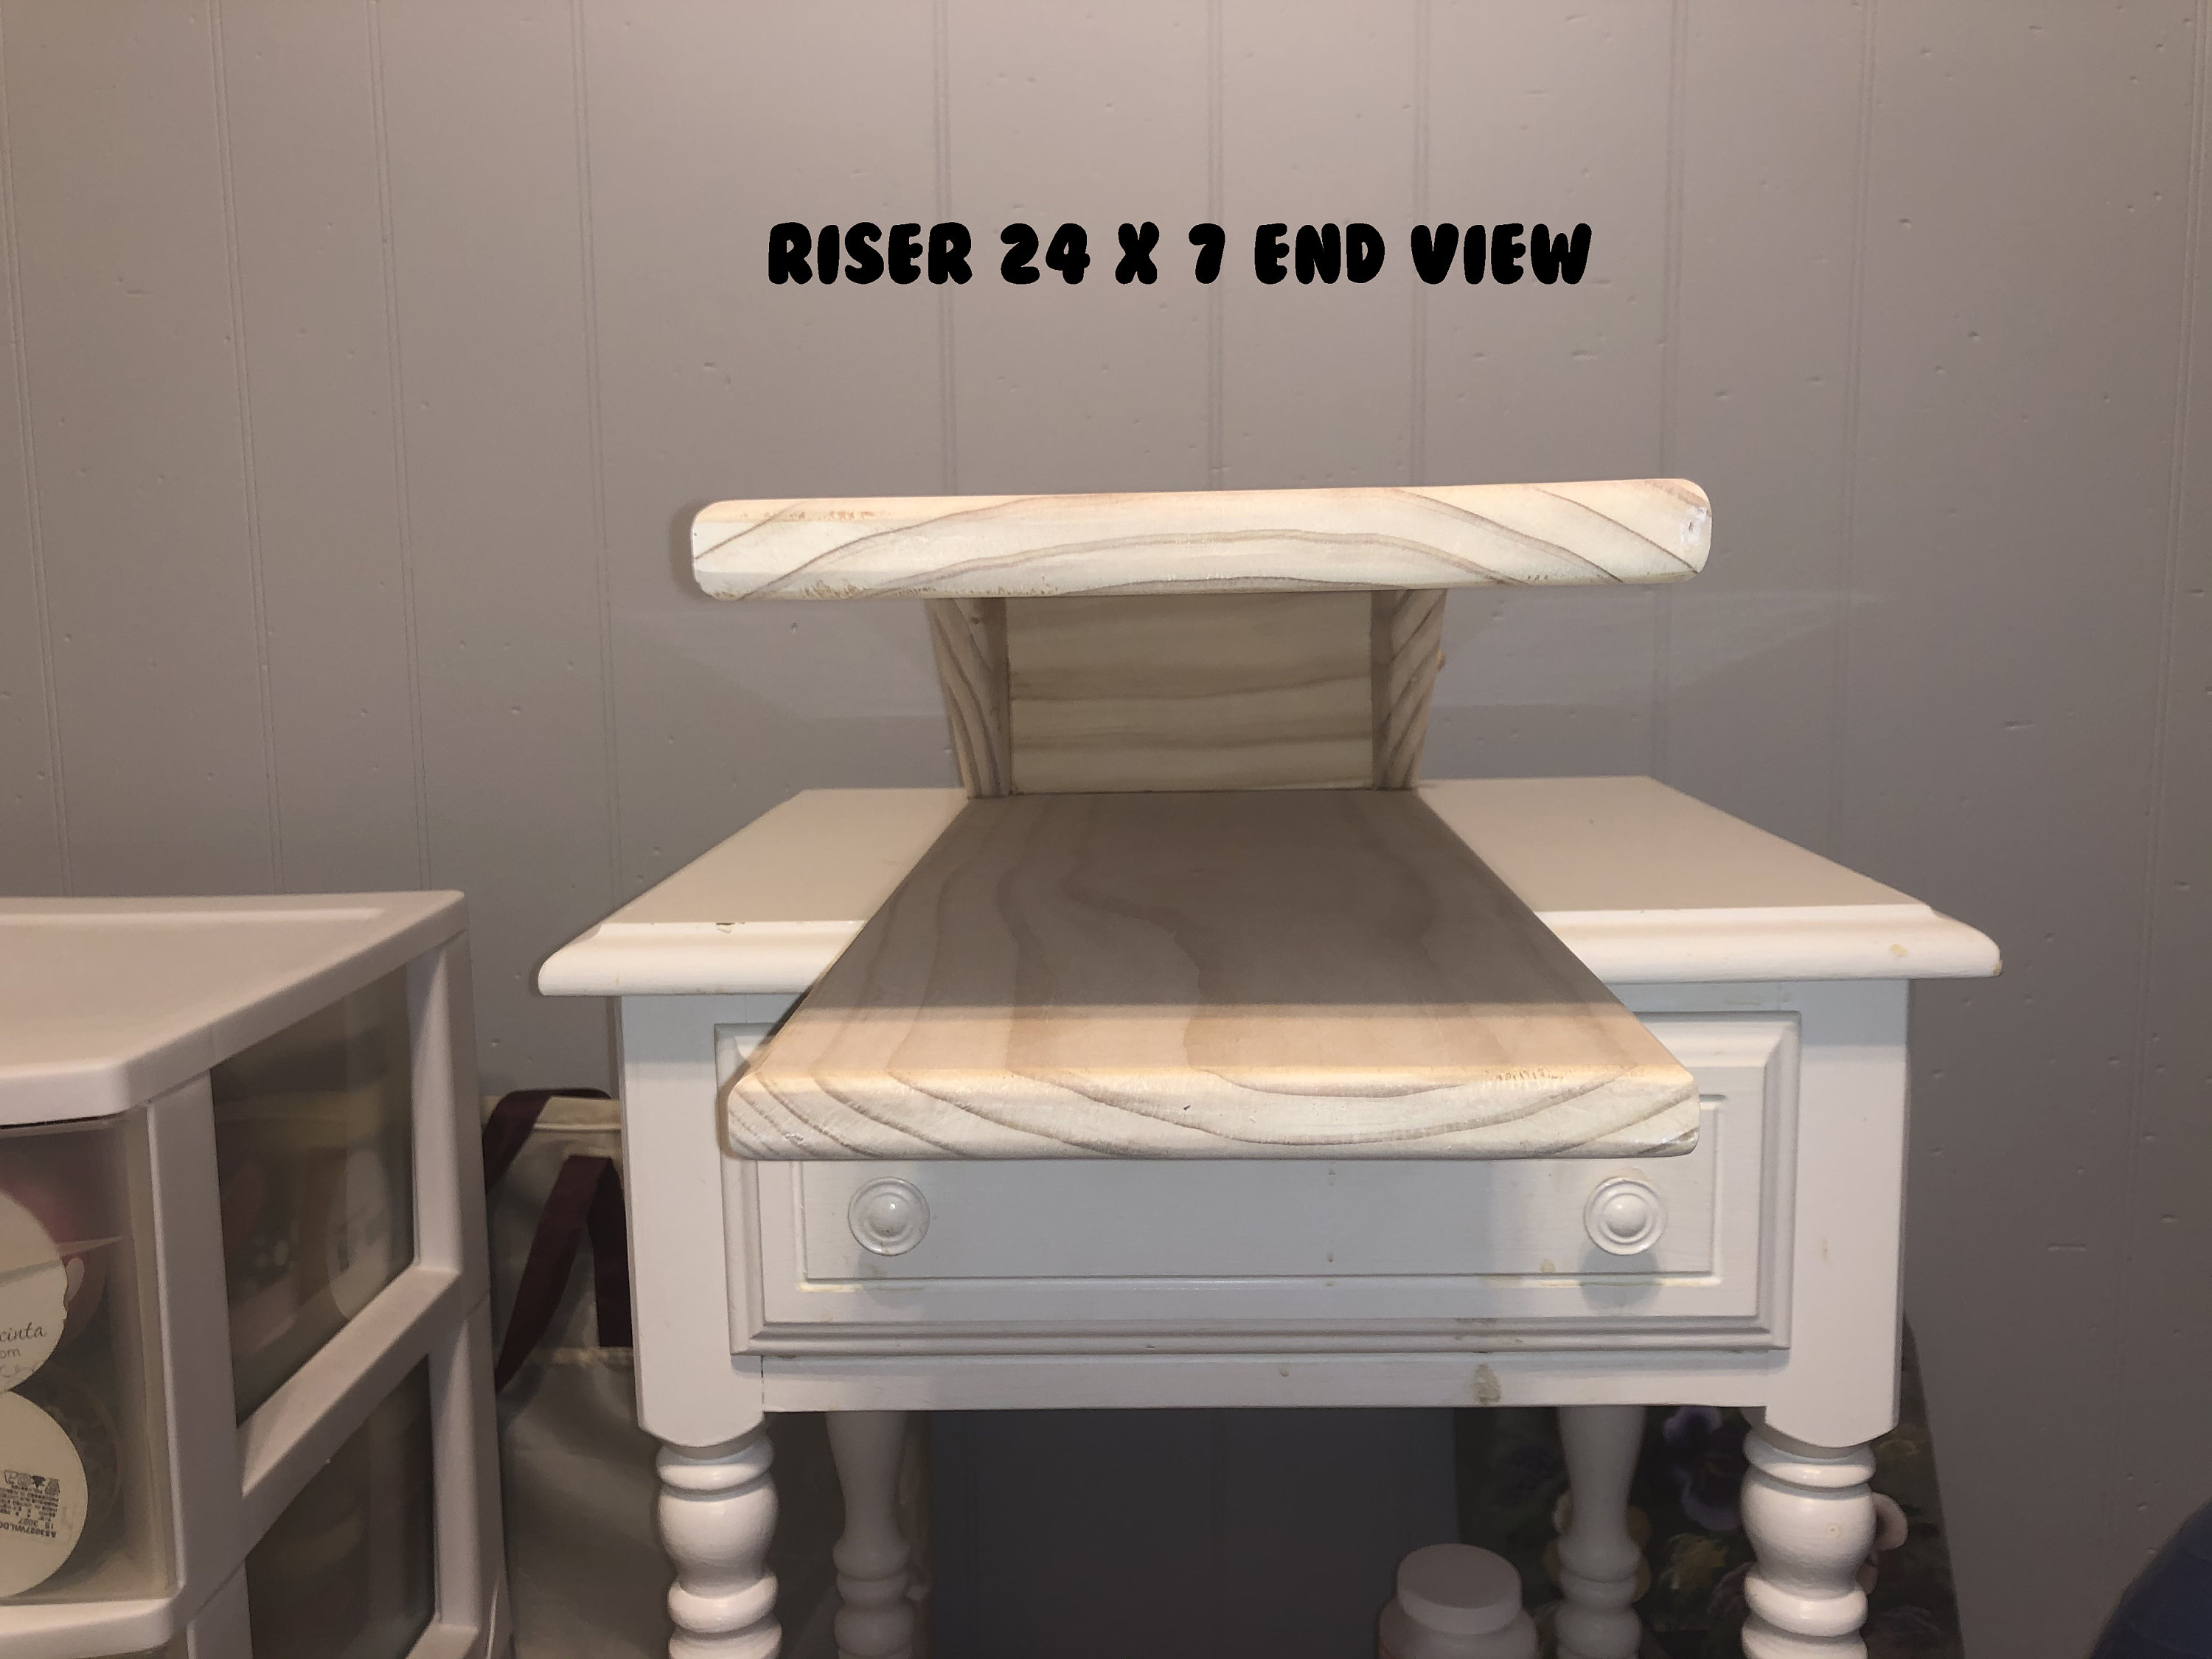 Solid Wood Embroidery or Sewing Machine Riser With Drawer - Free Arm S –  The Southern Farmhouse